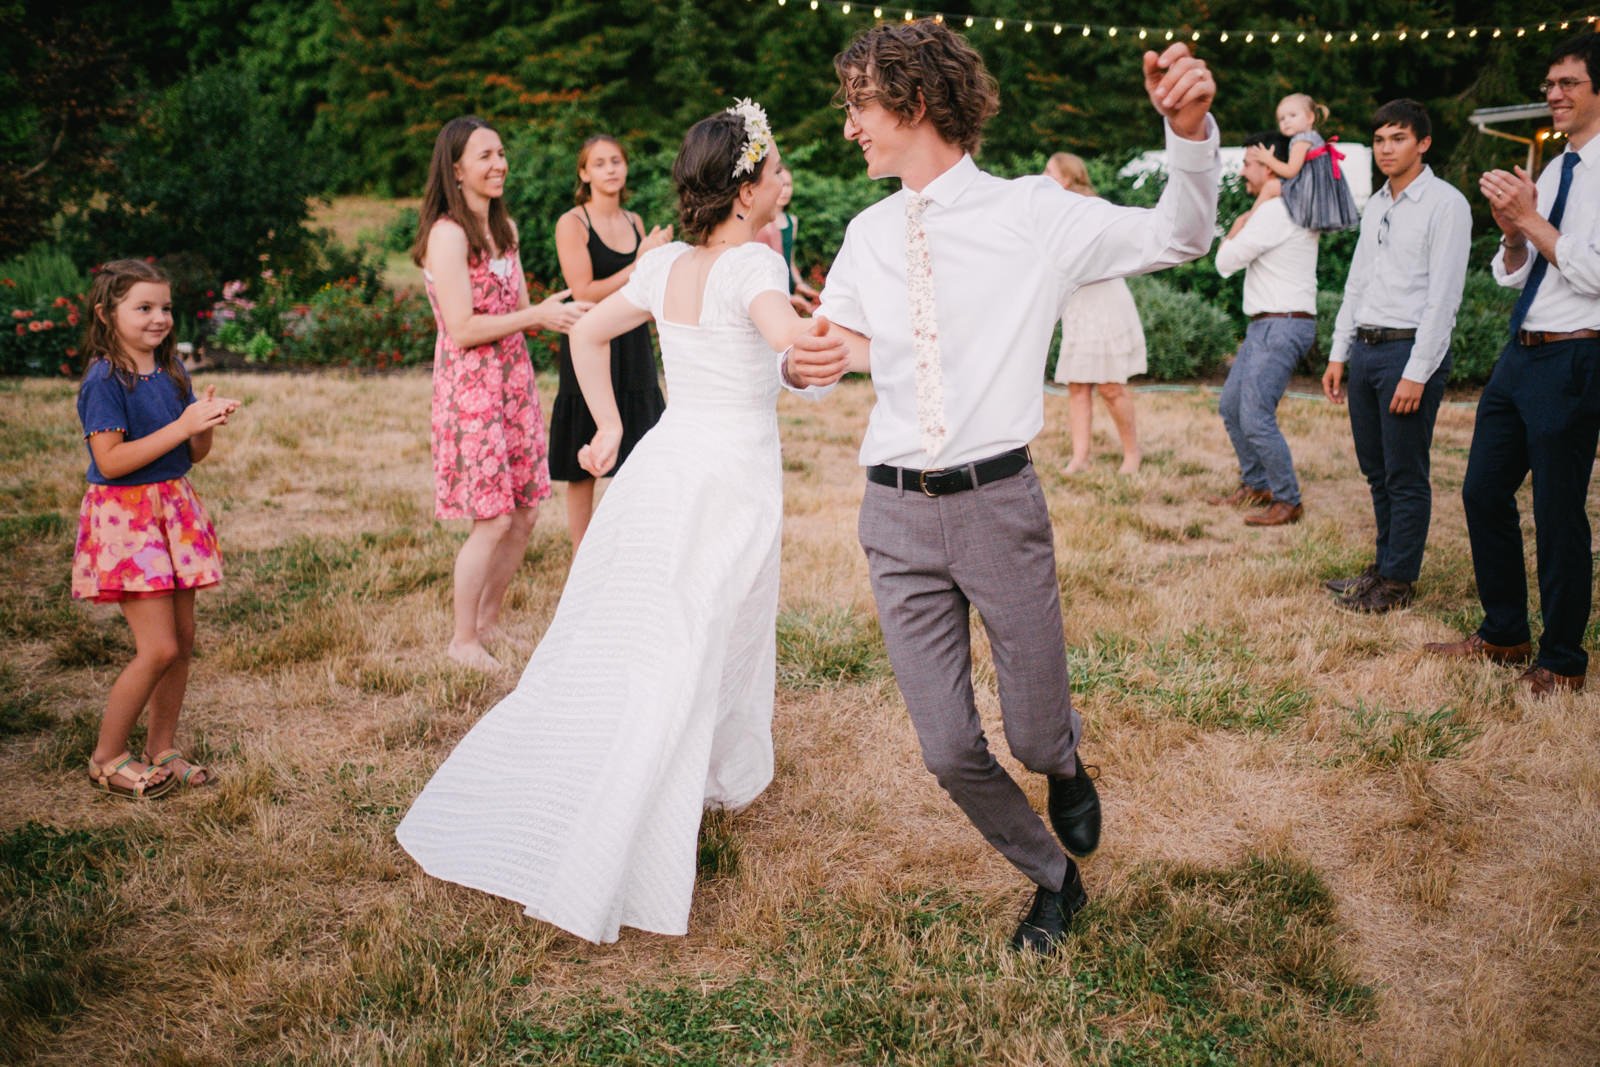  Bride and groom twirl together during English line dancing with guests 